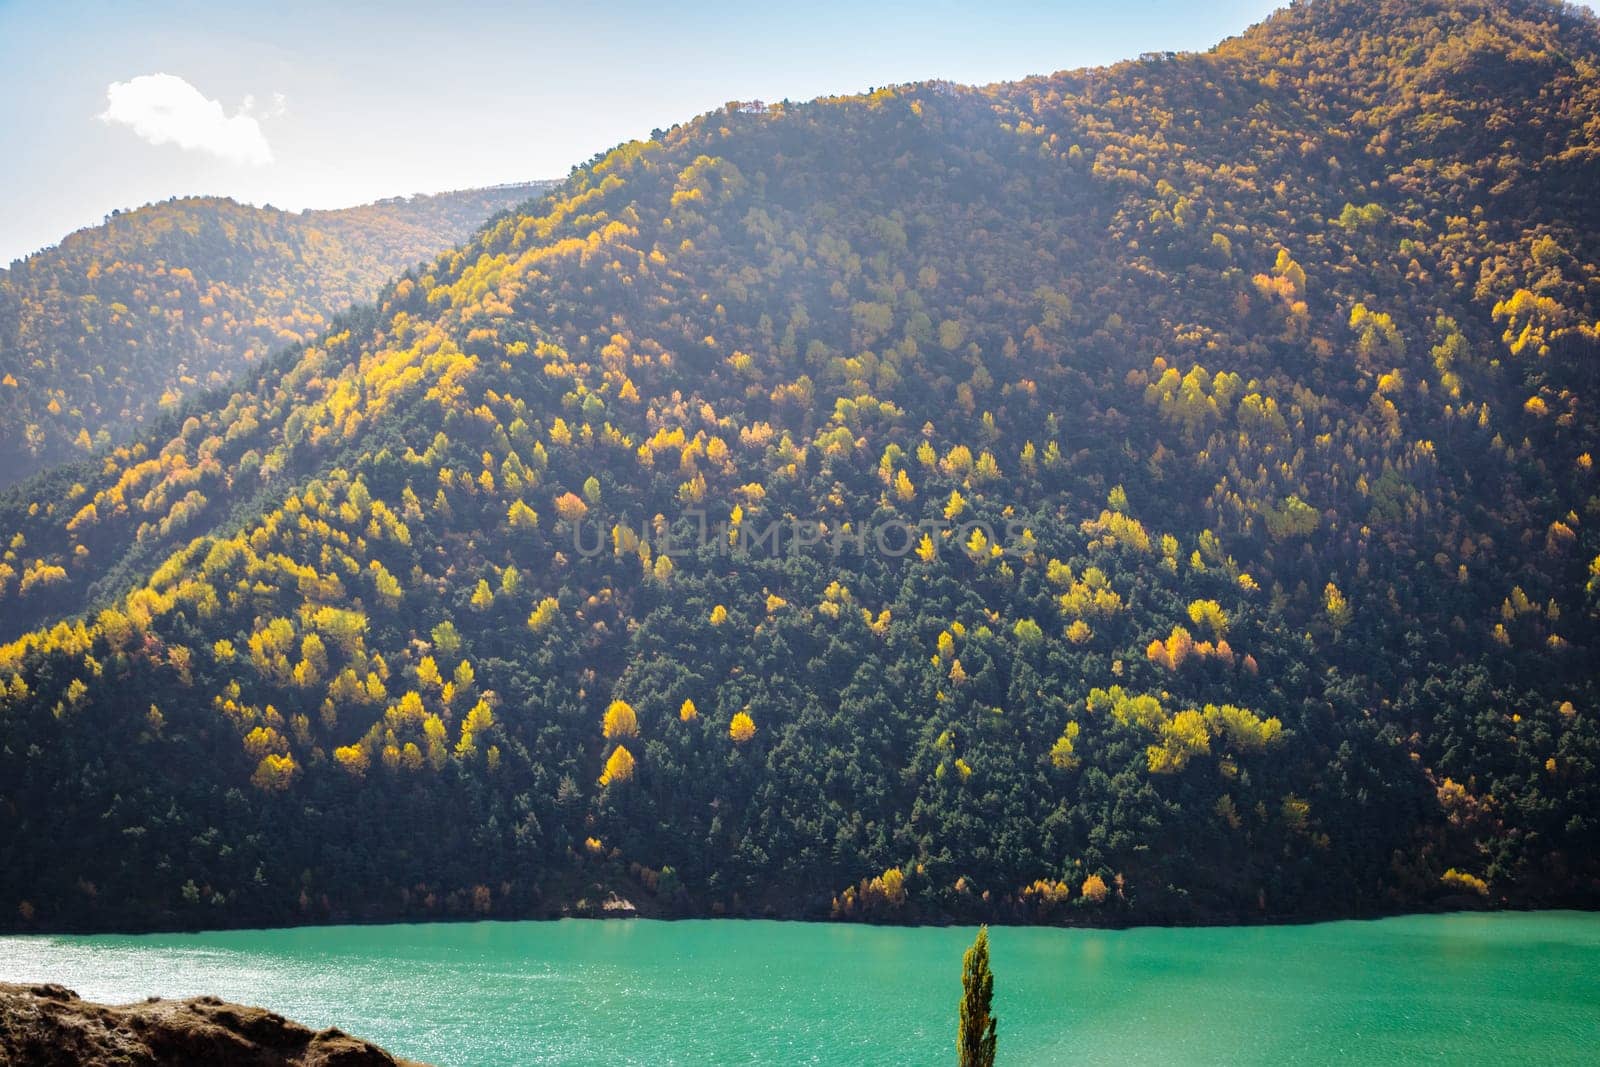 A serene mountain landscape with a beautiful blue reservoir and lush greenery under a clear blue sky, appealing to nature lovers and travel enthusiasts.